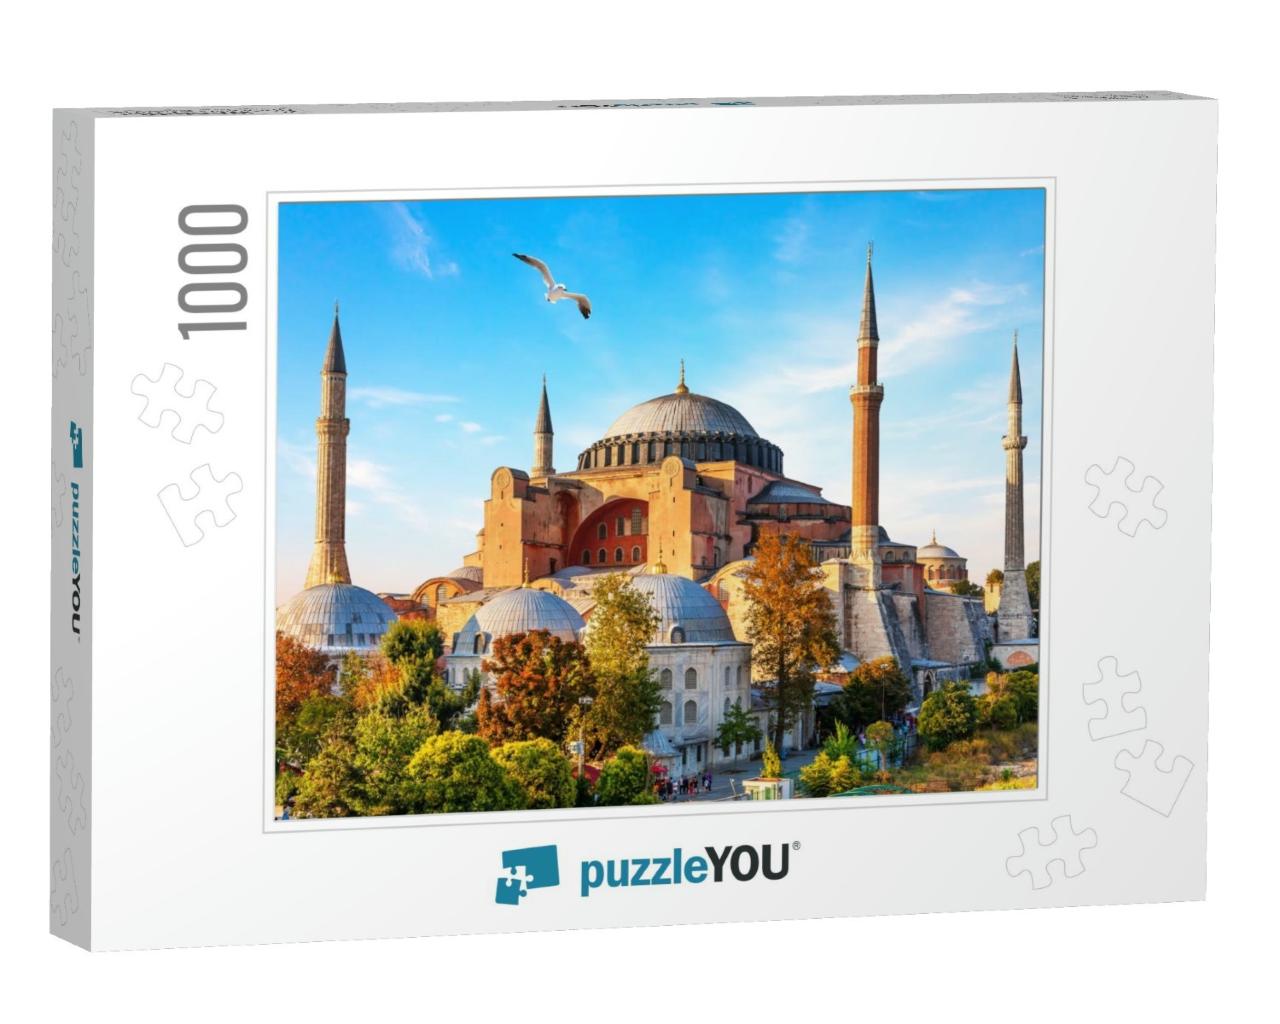 Famous Hagia Sophia Mosque in Istanbul, Turkey... Jigsaw Puzzle with 1000 pieces